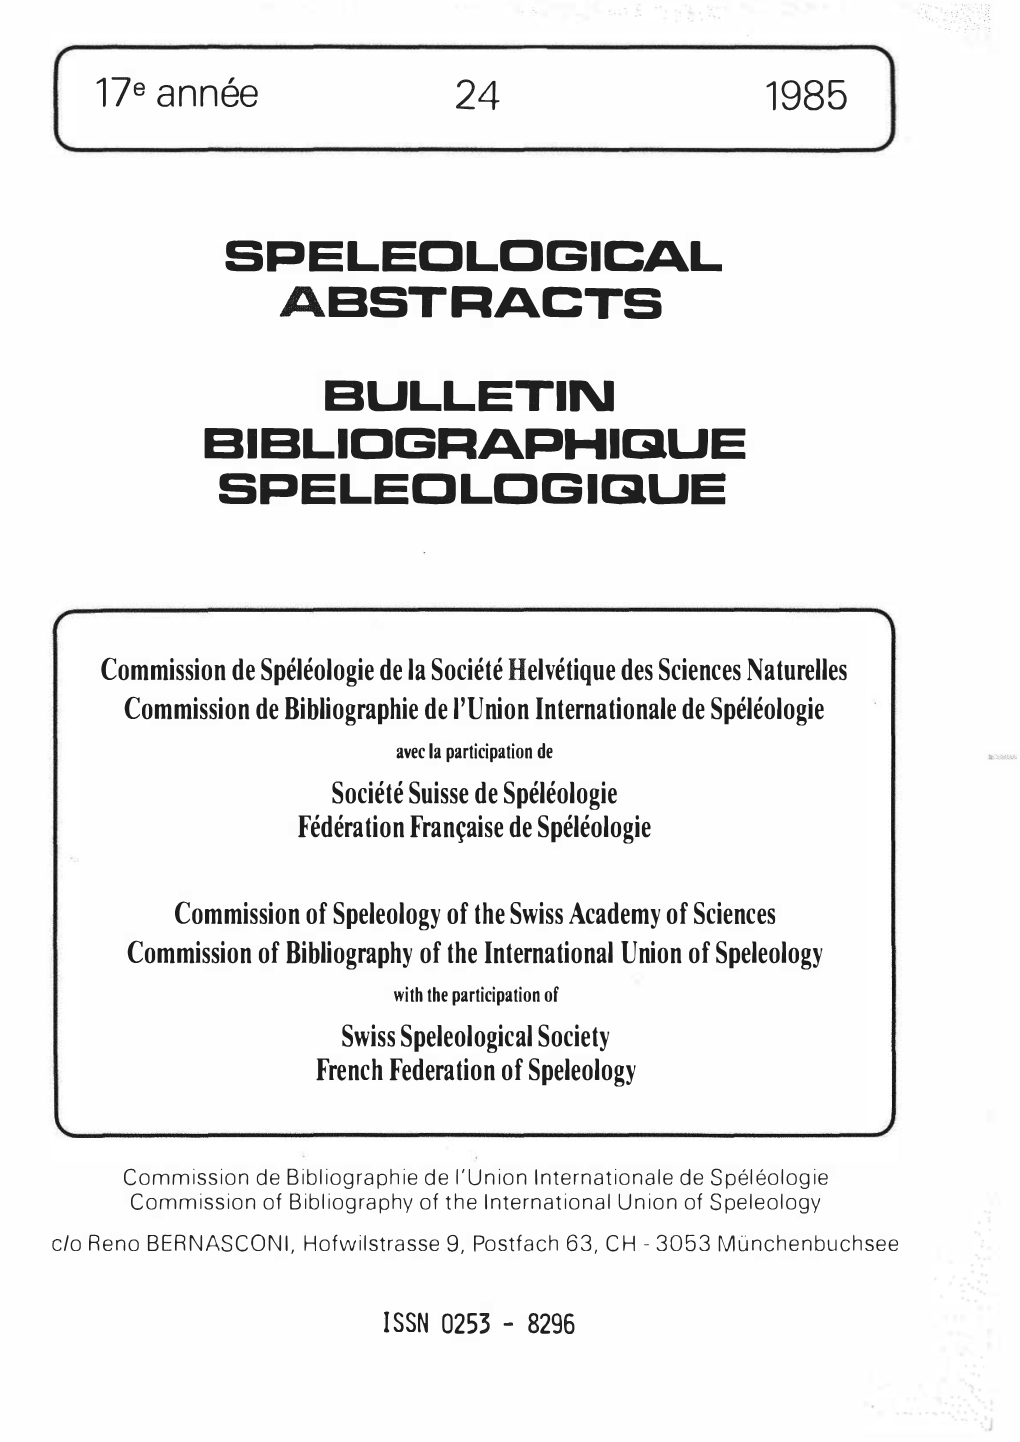 Speleological Abstracts Bulletin Bibliographigue